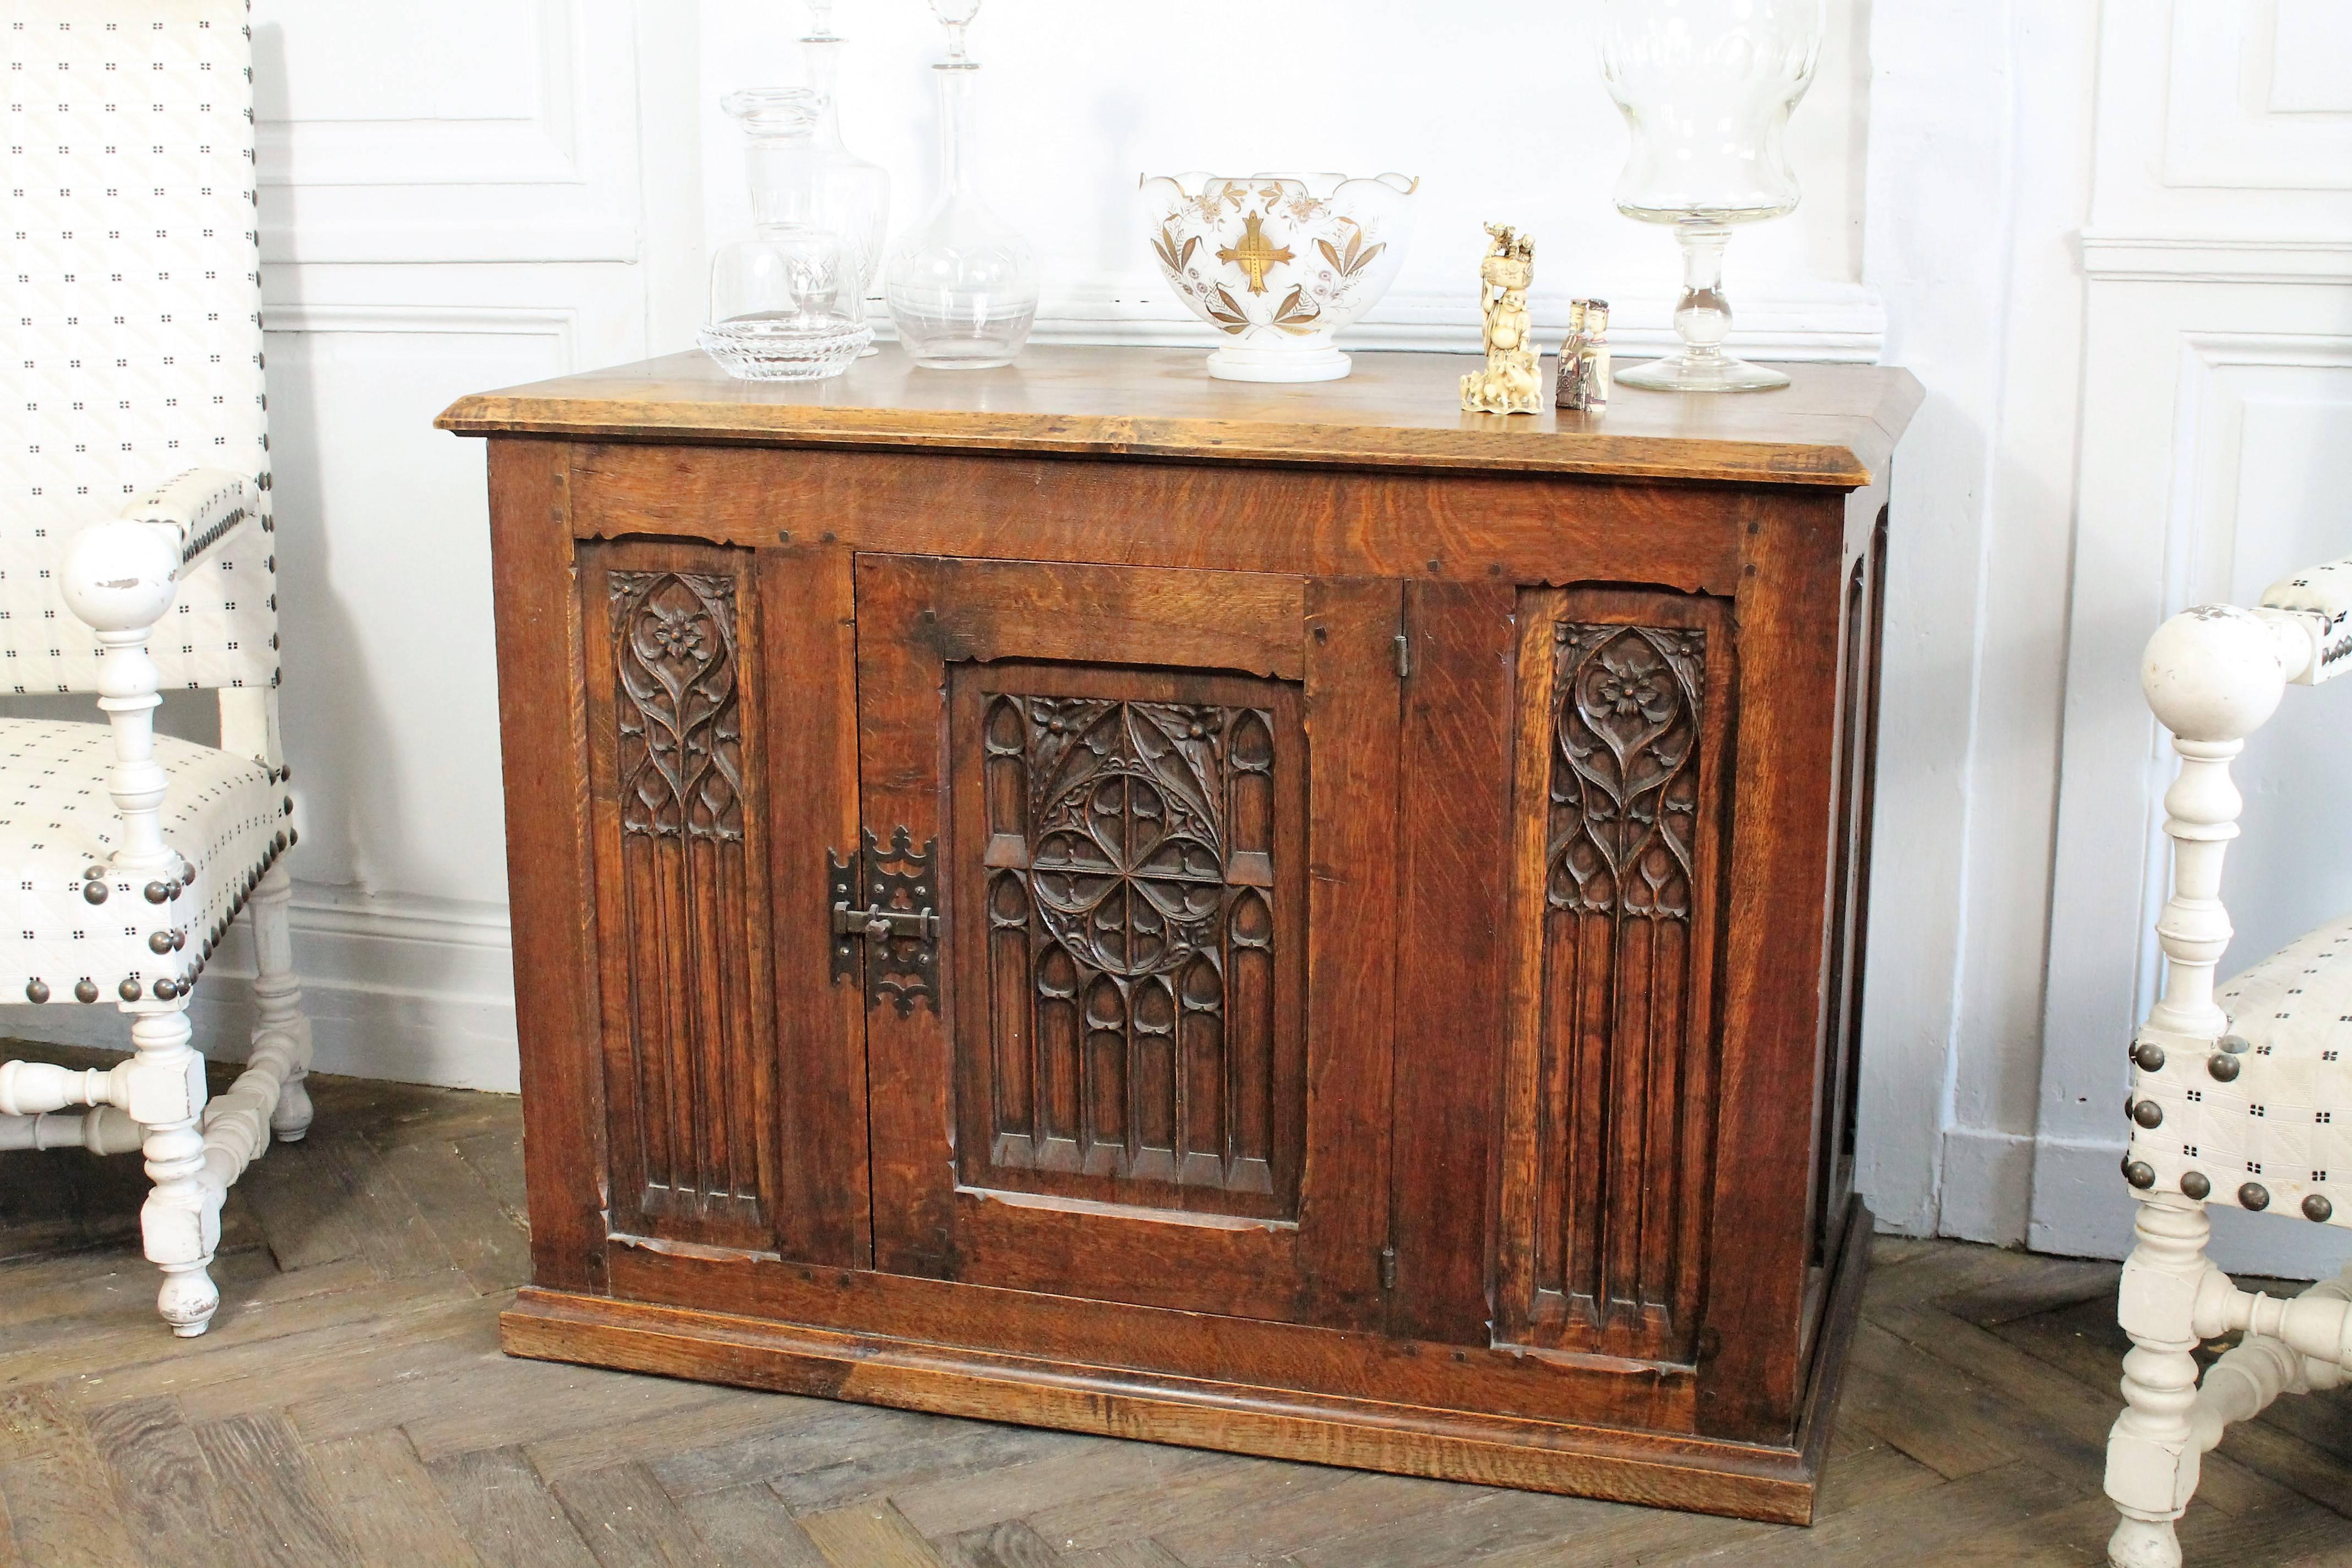 19th Century Gothic Revival Armoire with an Oak Door